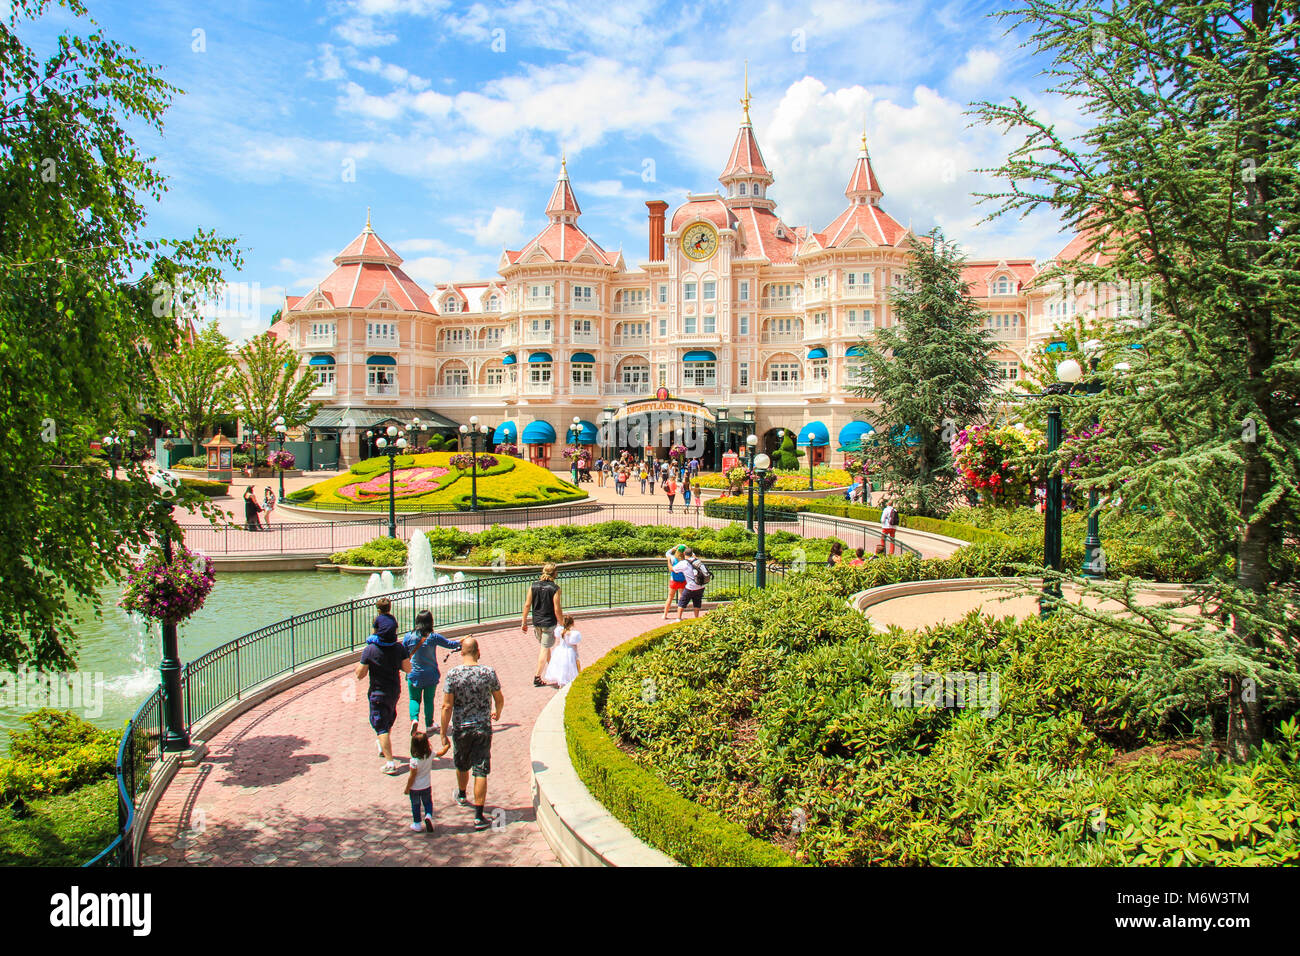 The Disneyland Hotel at Eurodisney in Paris is a luxury, five star hotel and the main entrance to the Disneyland Park. Stock Photo